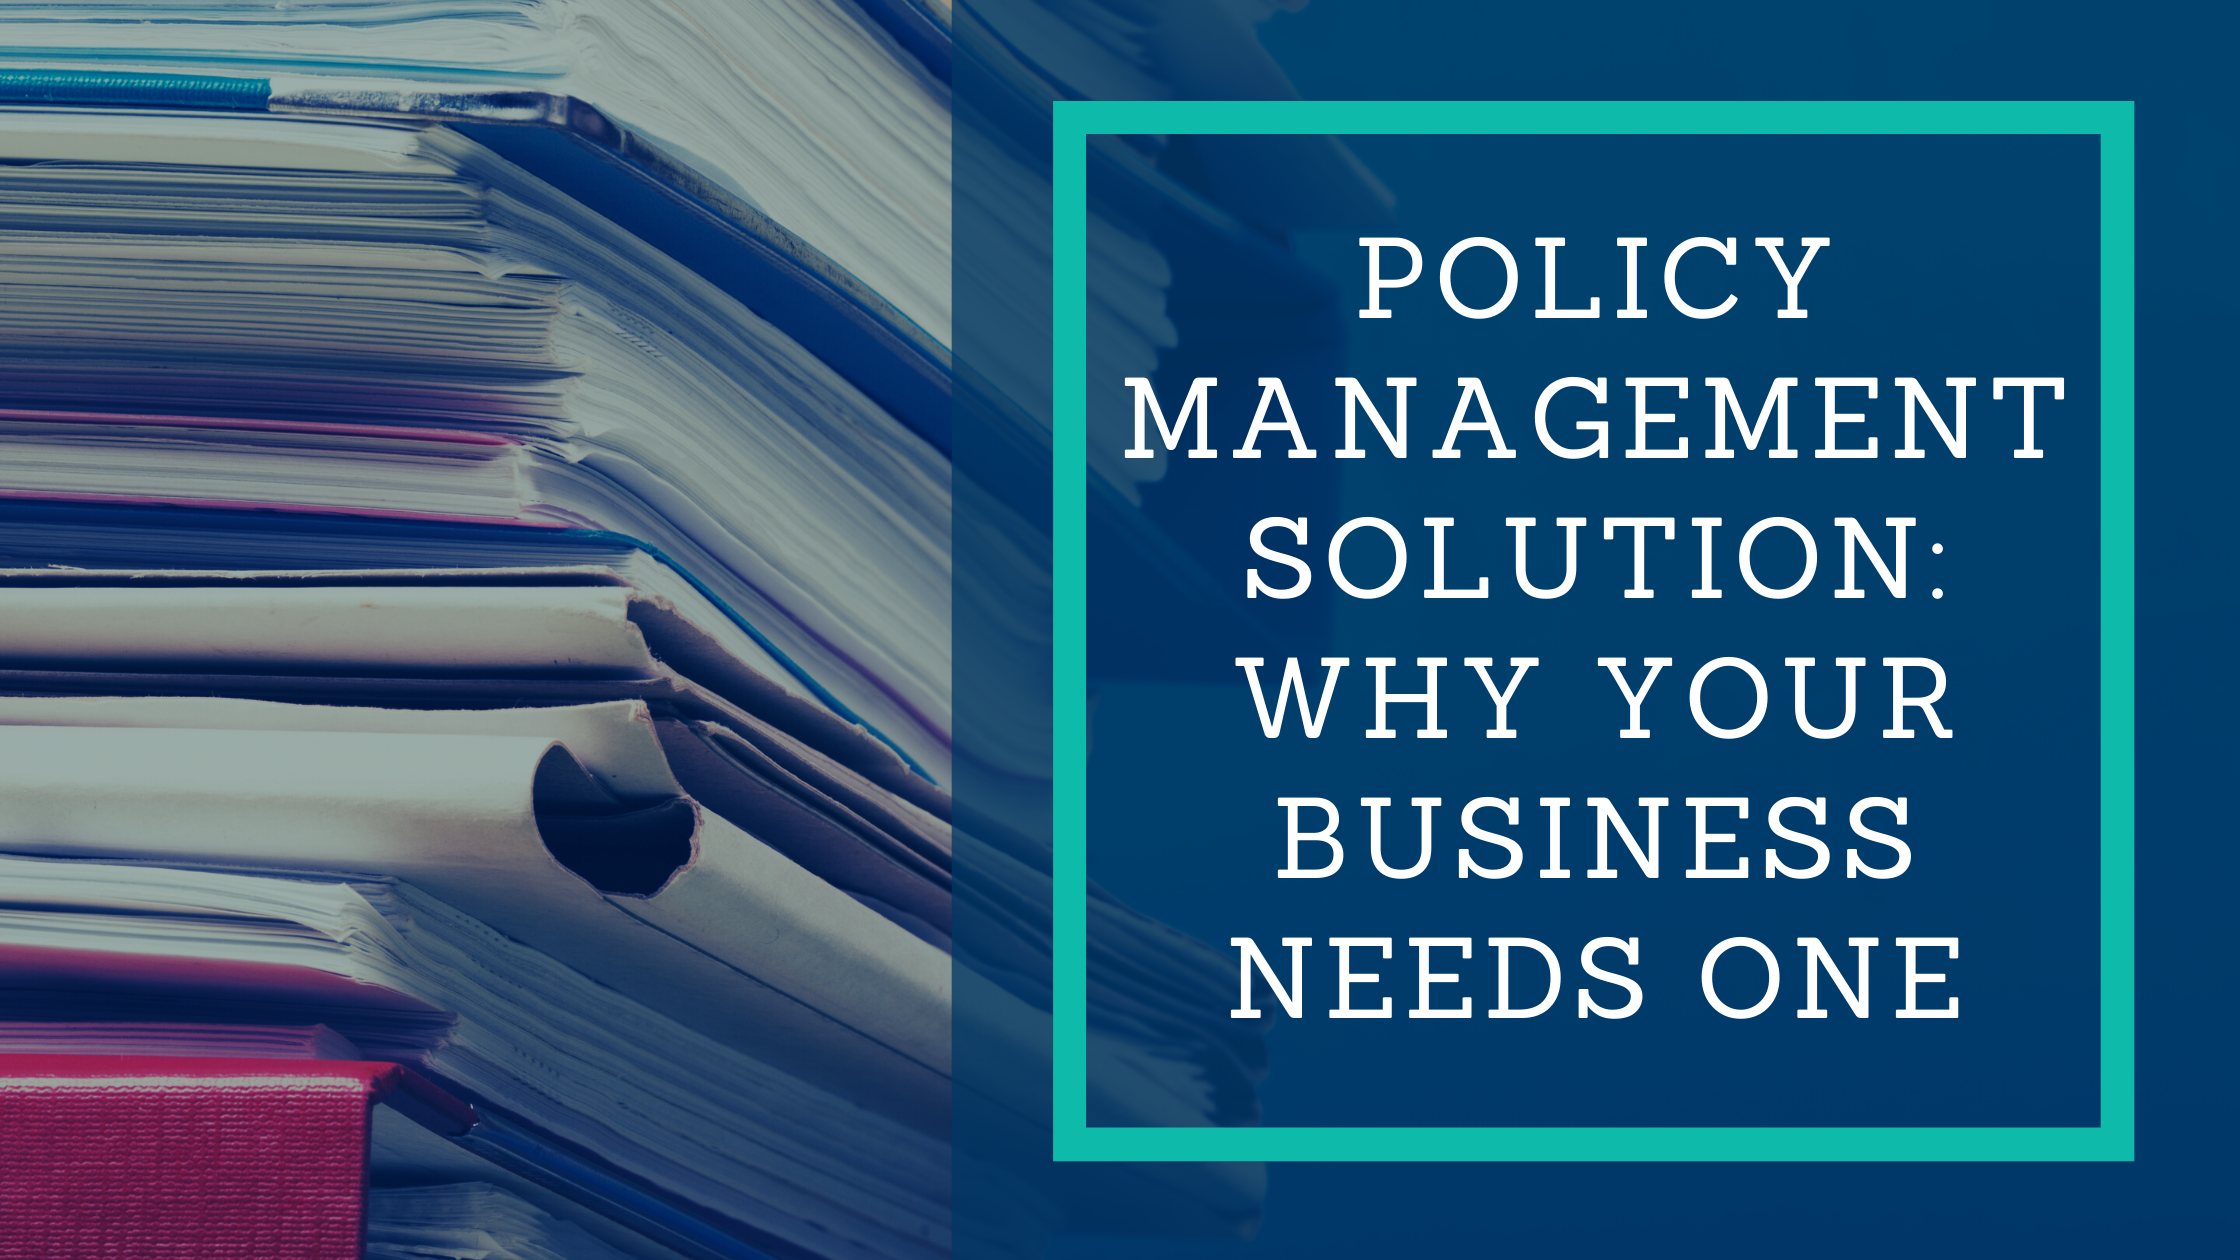 Policy Management Solution: Why Your Business Needs One